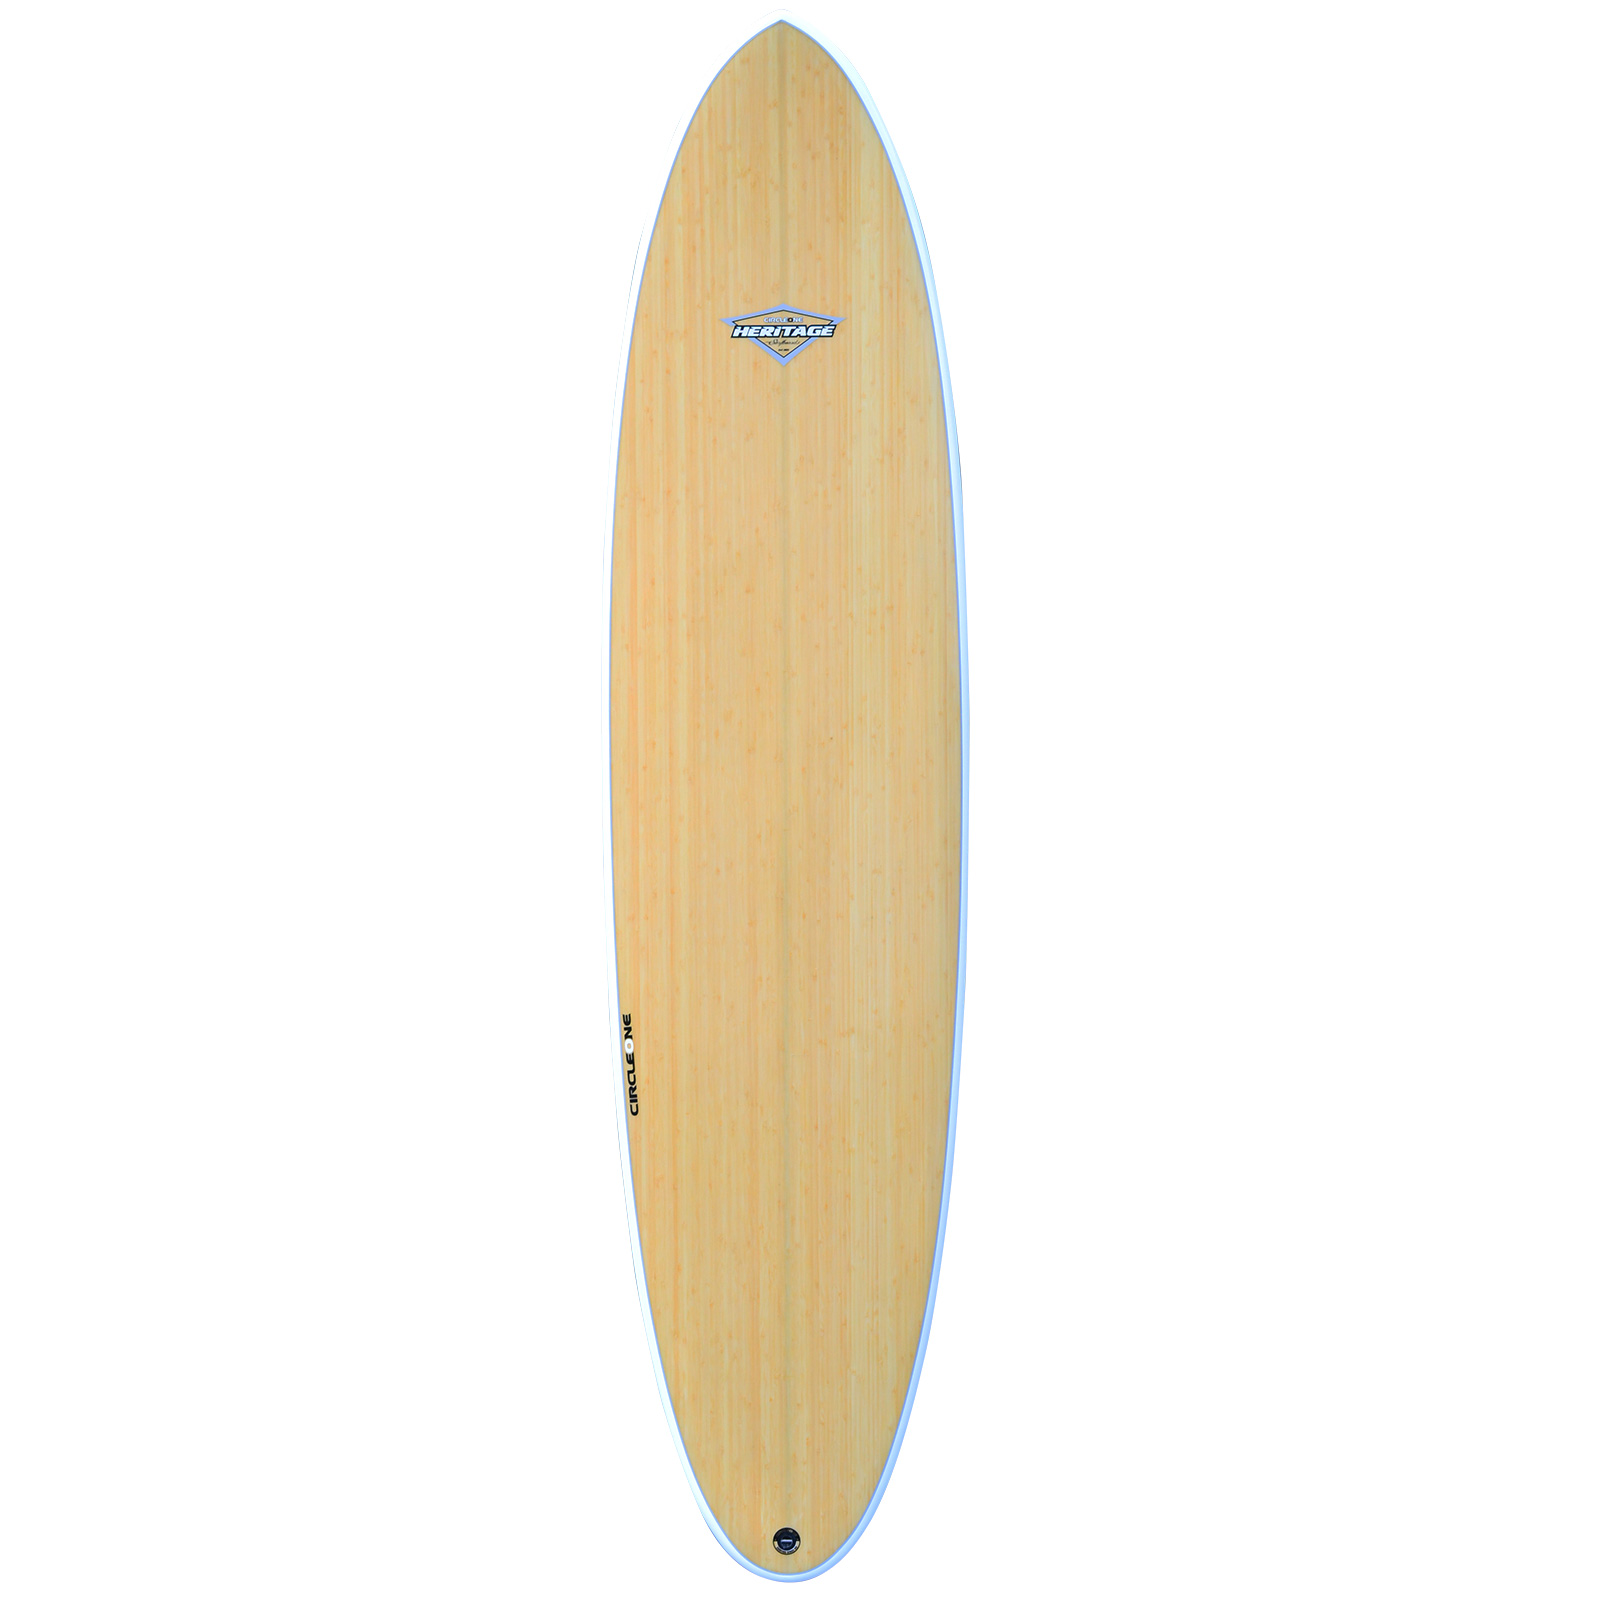 7ft 6inch Round Pin Surfboard | Sustainably Sourced Bamboo | UK Design